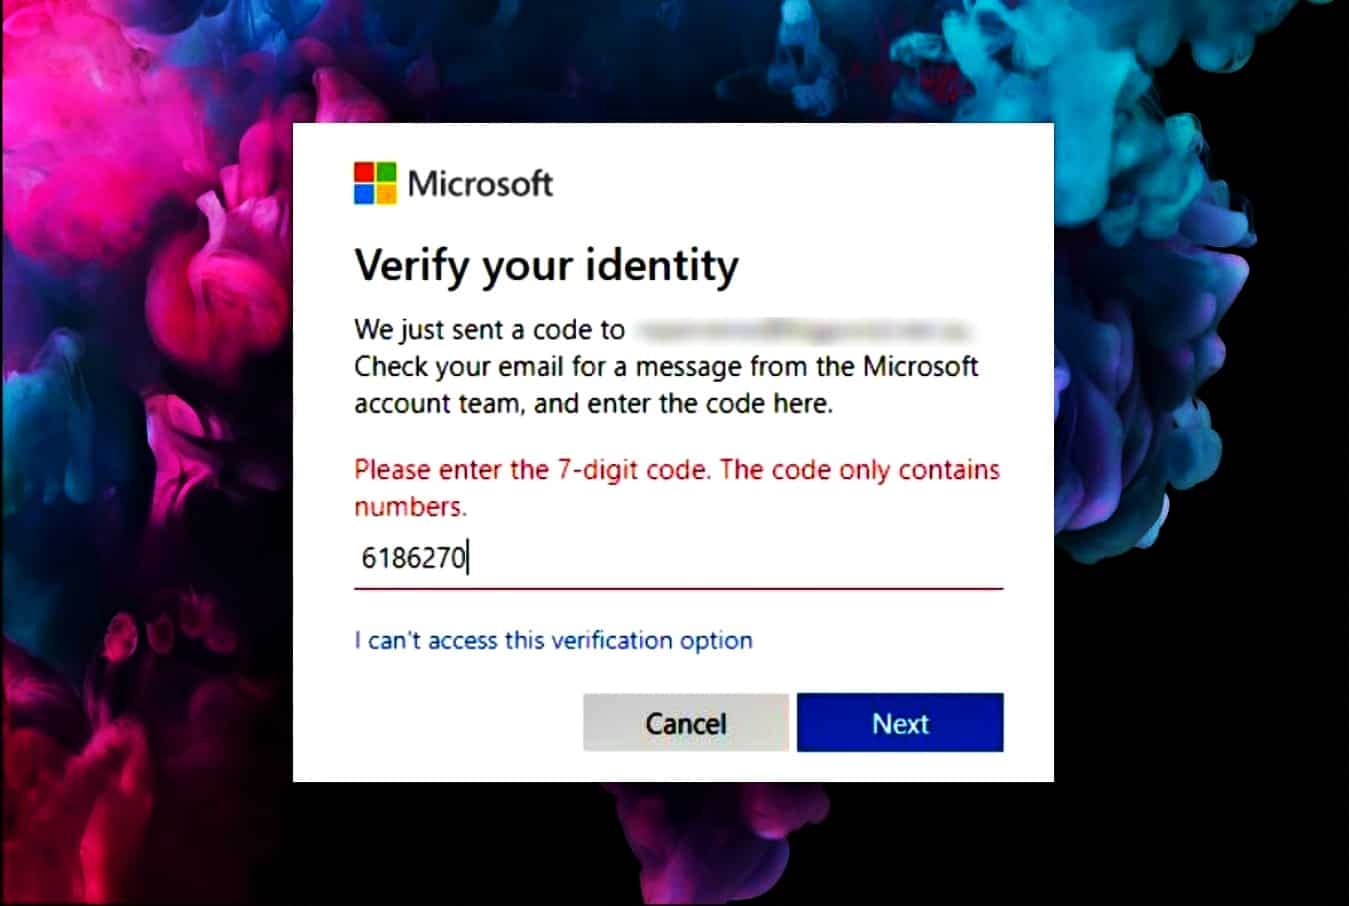 Flaw allowed bypassing verification code, log in to any Microsoft account